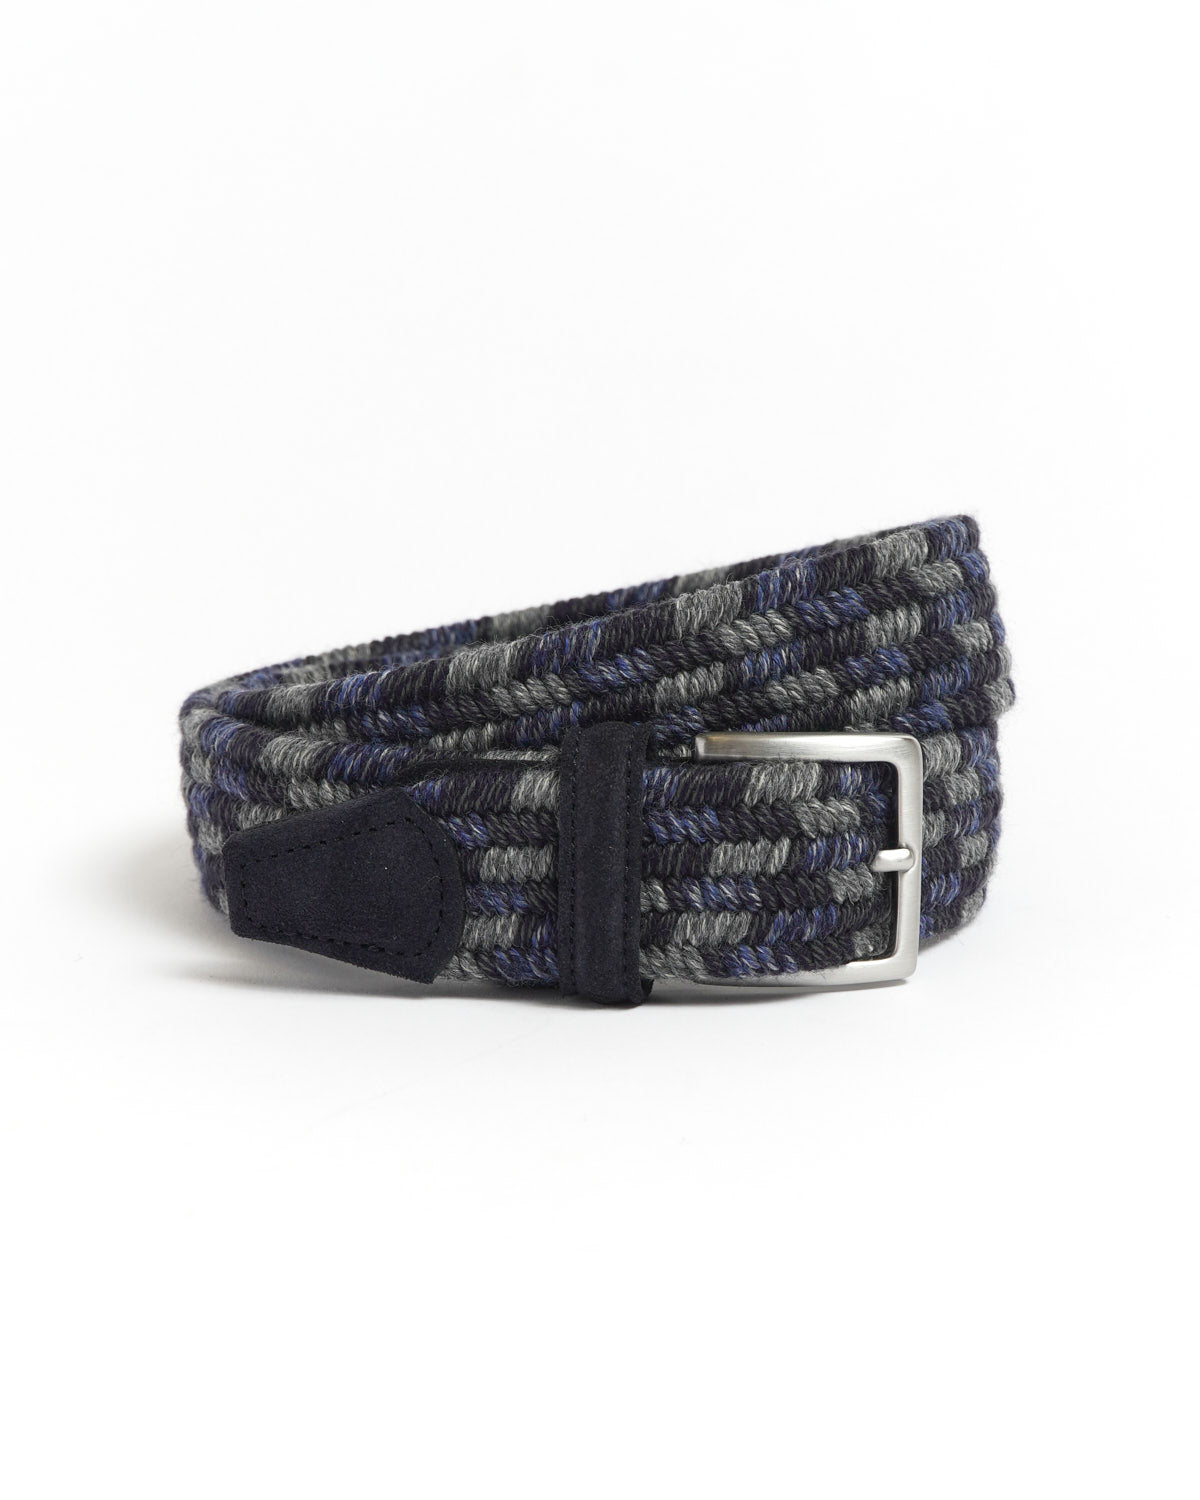 Anderson's Cashmere Wool Braided Stretch Belt 